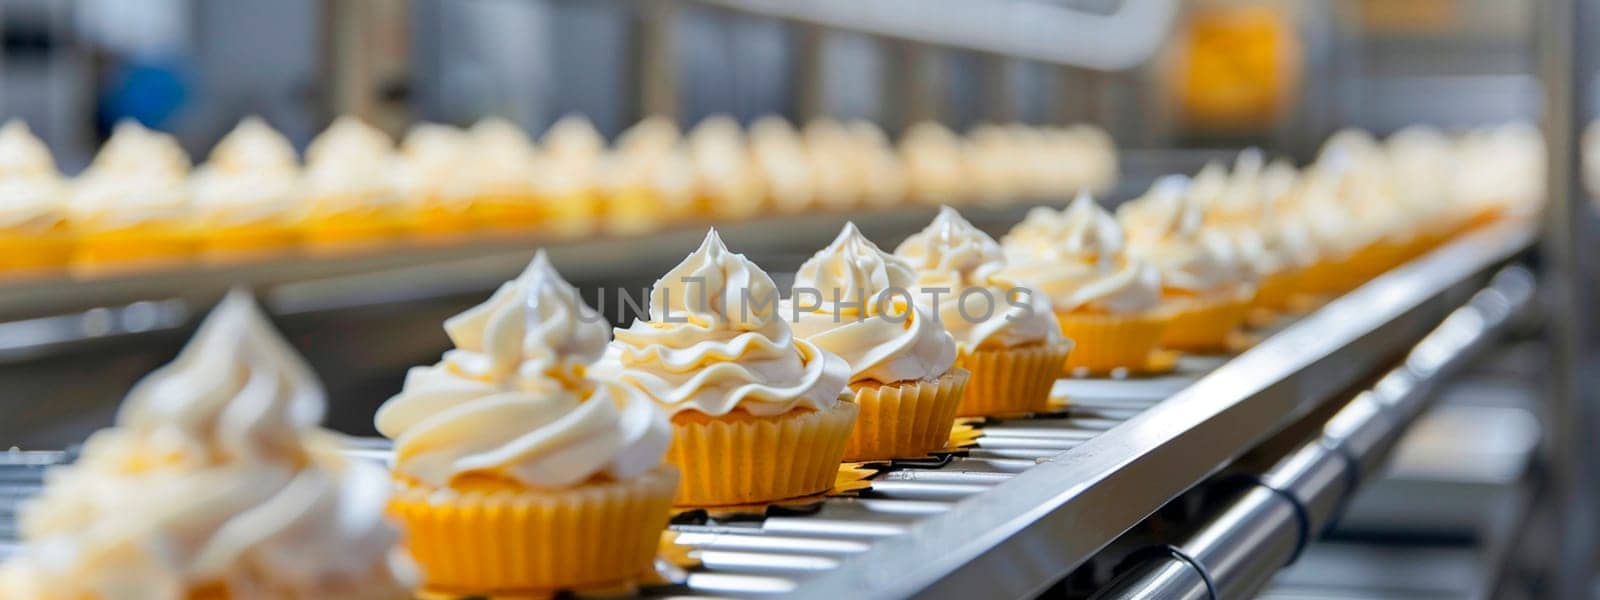 cupcakes in the factory industry. Selective focus. food.